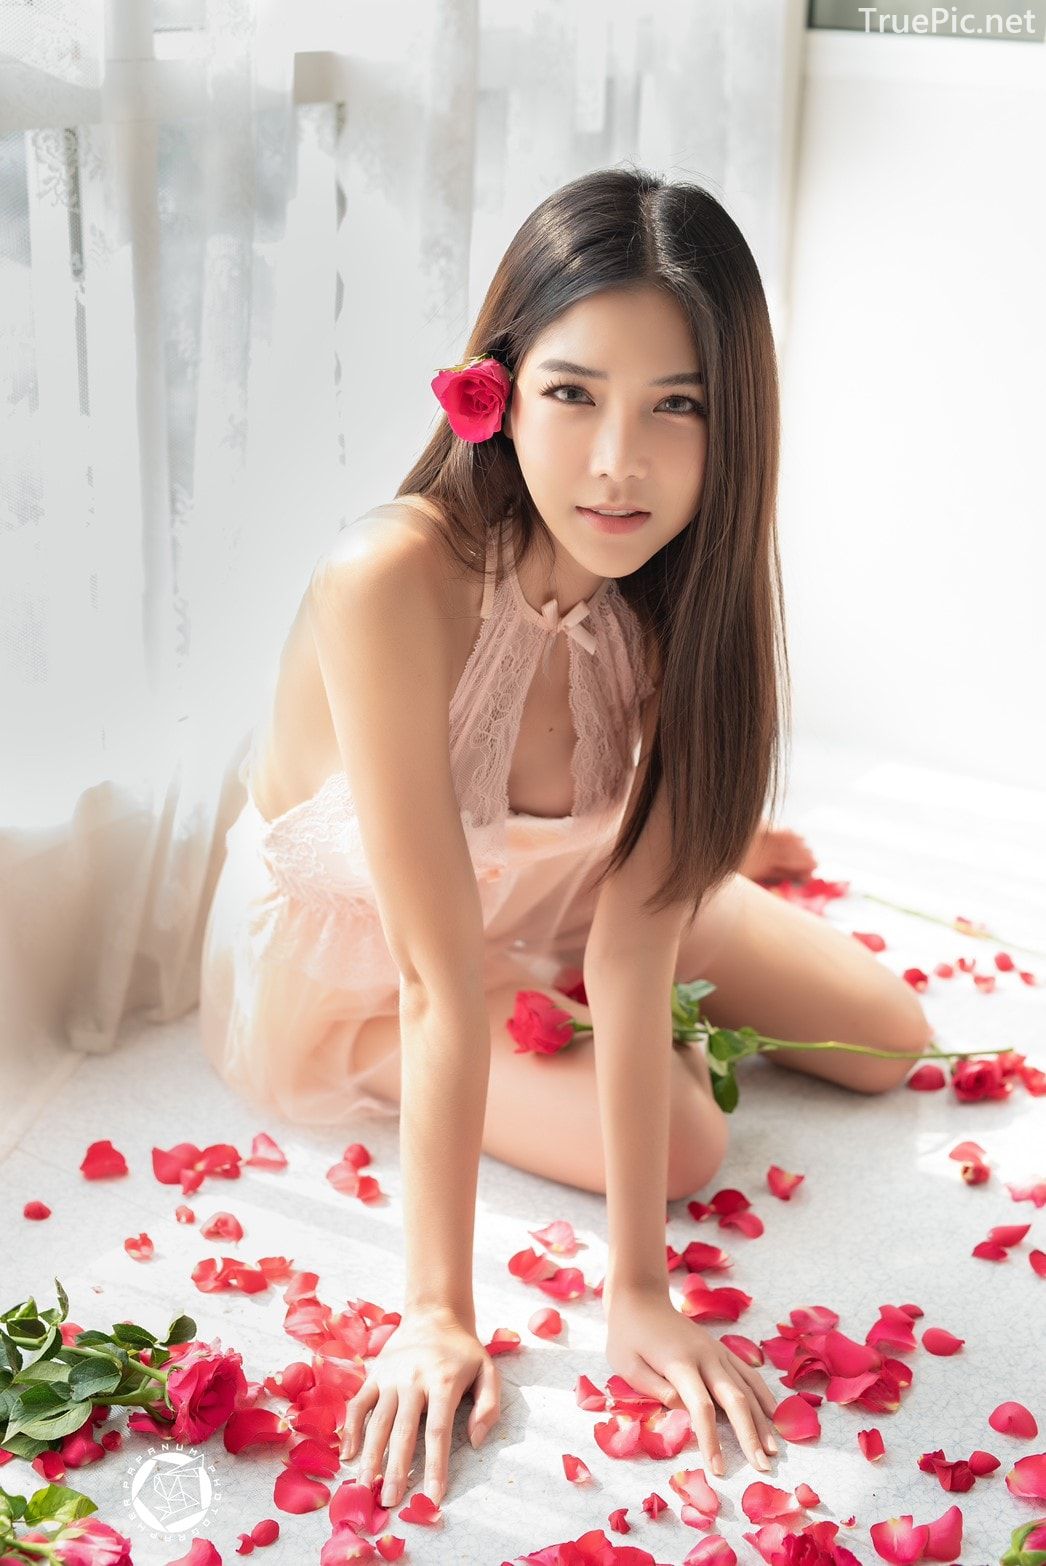 Thailand Model - Phitchamol Srijantanet - Roses for Lovers - TruePic.net - Picture 11